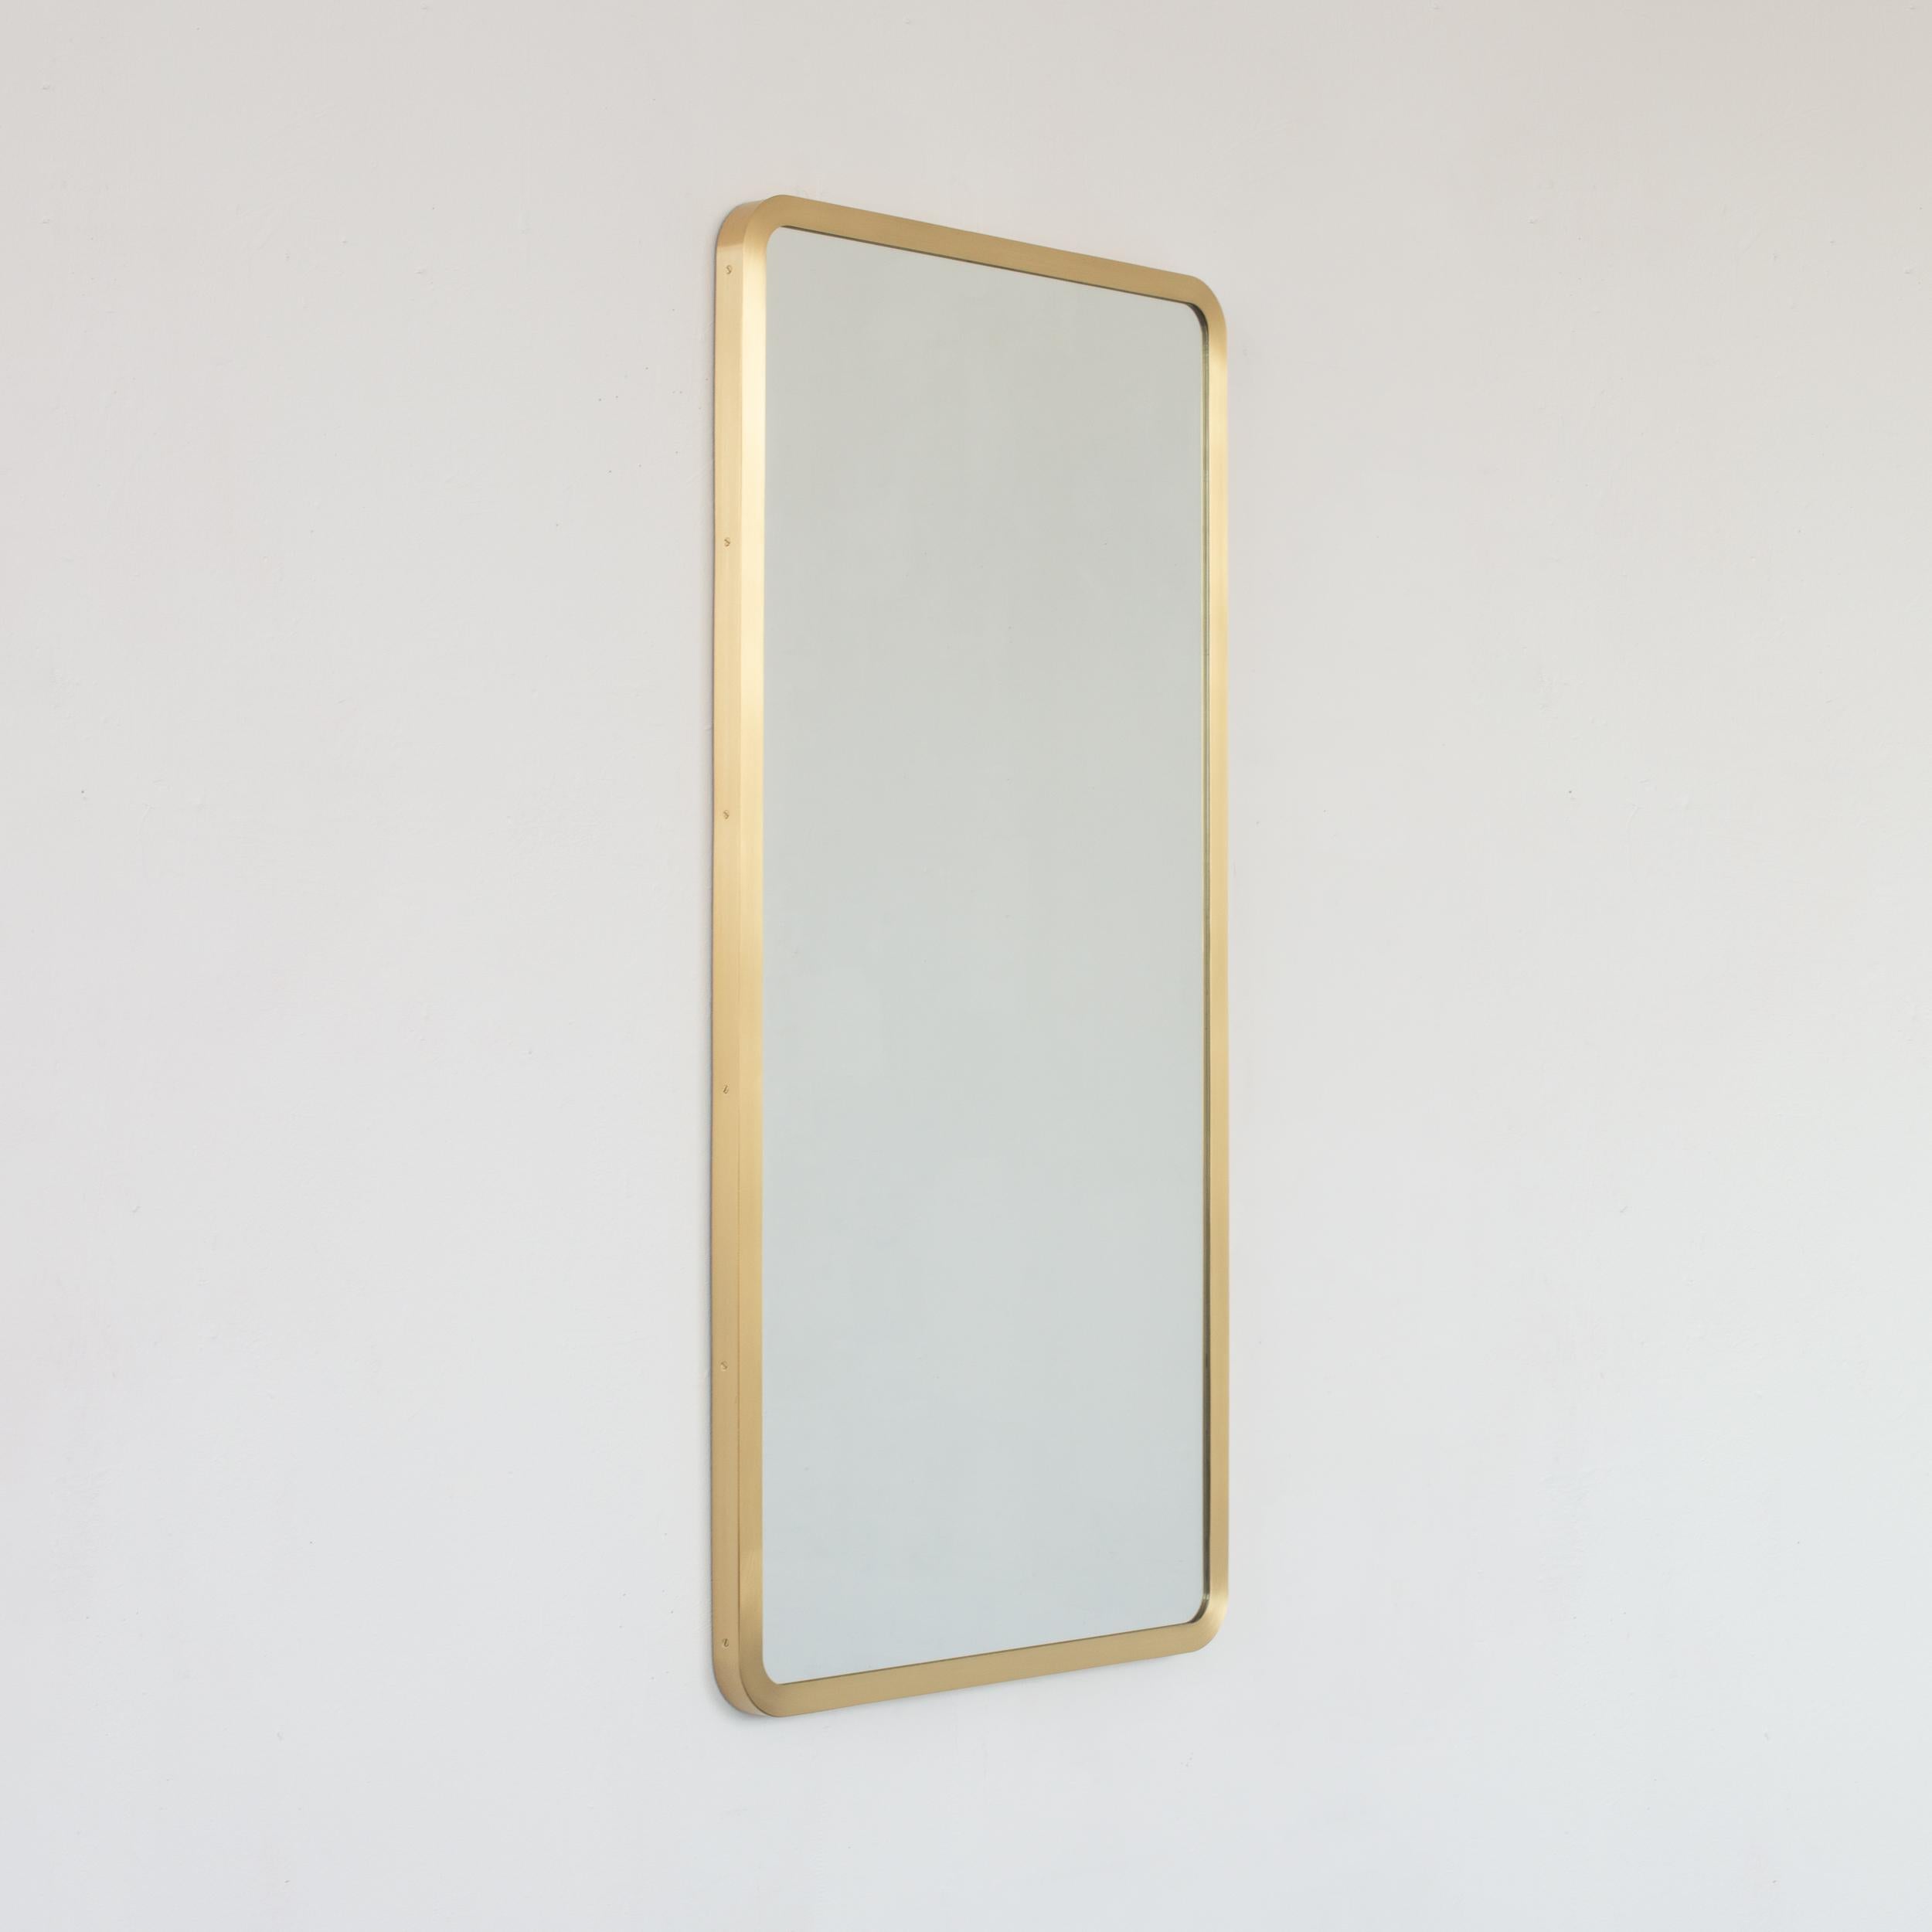 Quadris Rectangular Art Deco Mirror with a Full Front Brass Frame, Large For Sale 3